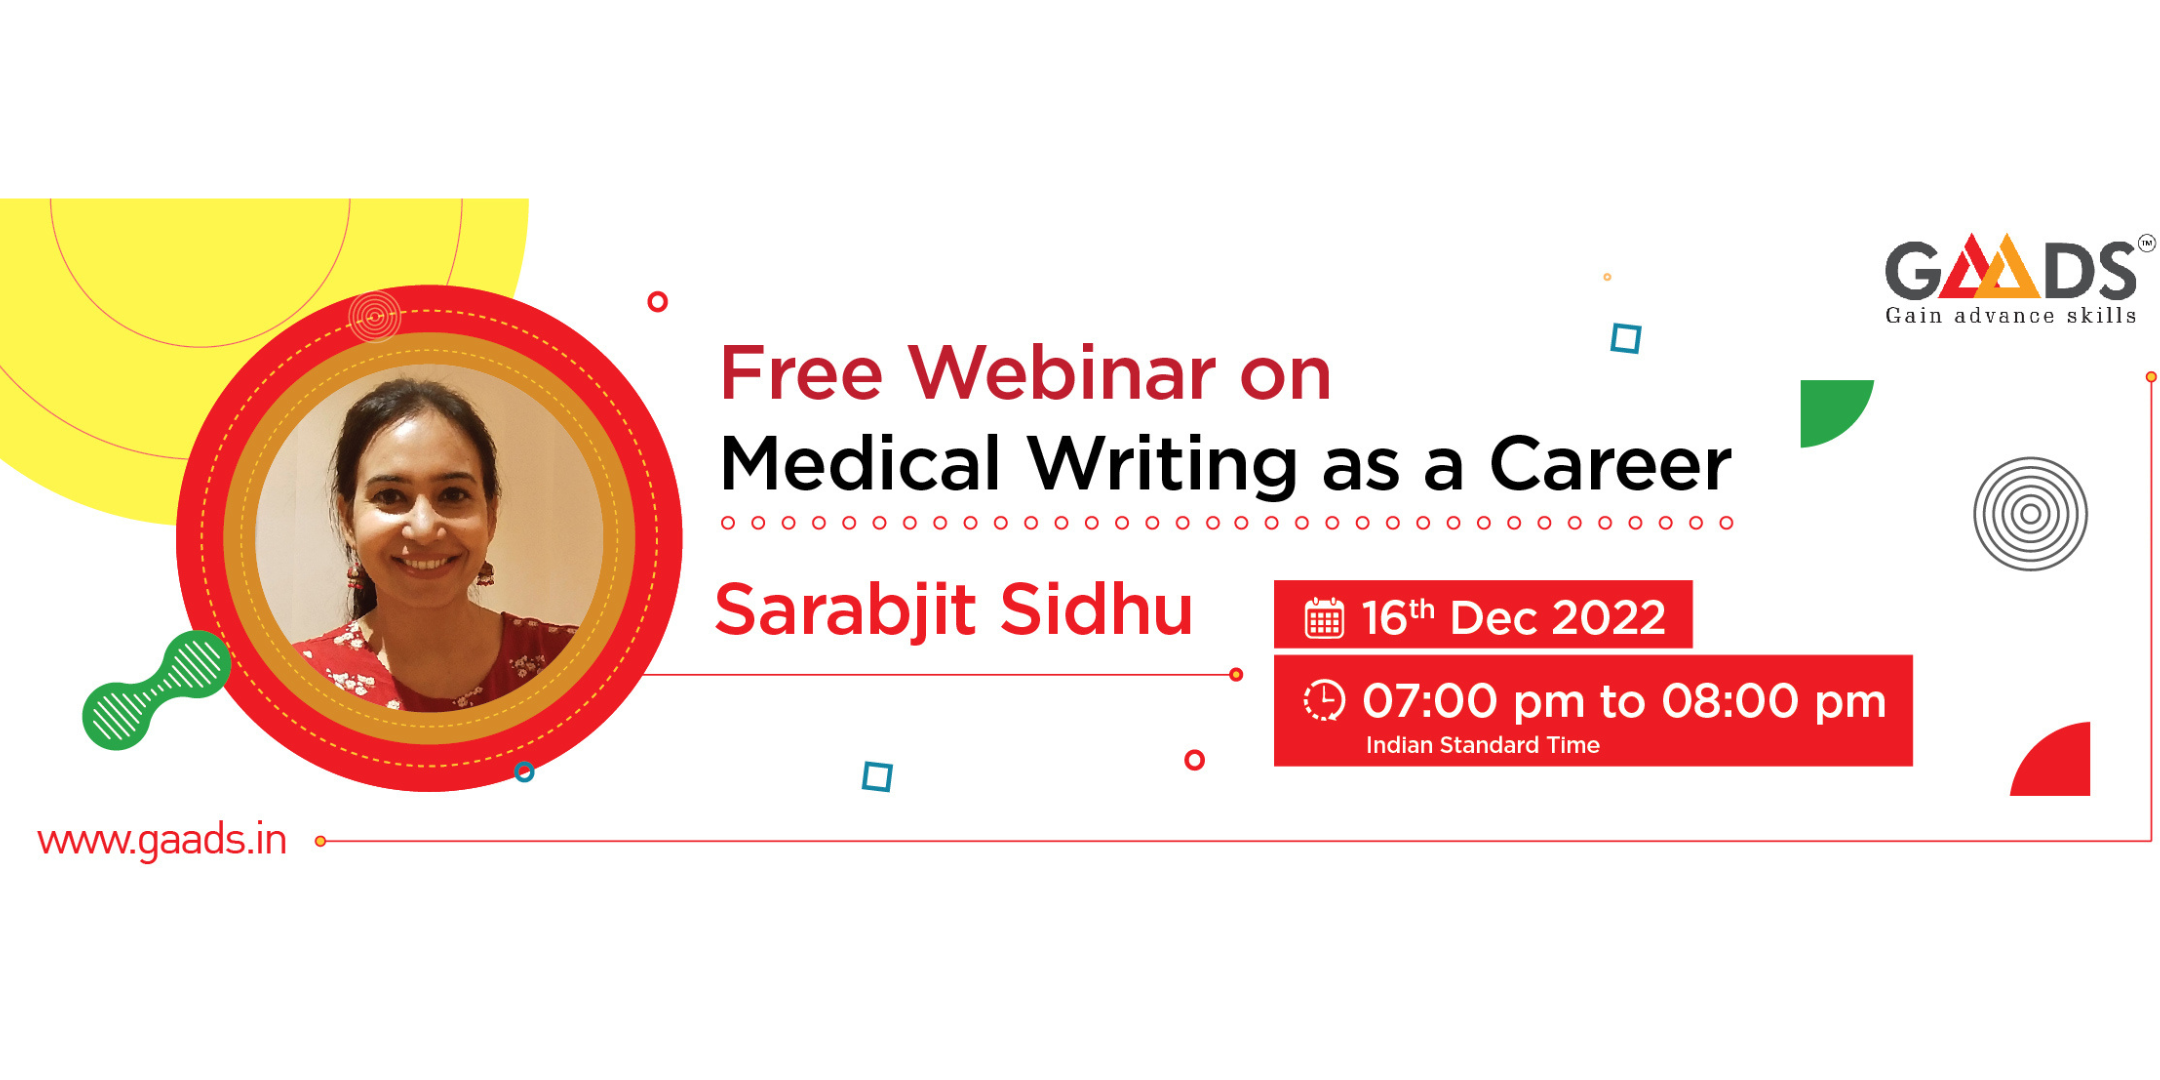 Join us for a Free Webinar on Medical Writing as a Career, Online Event